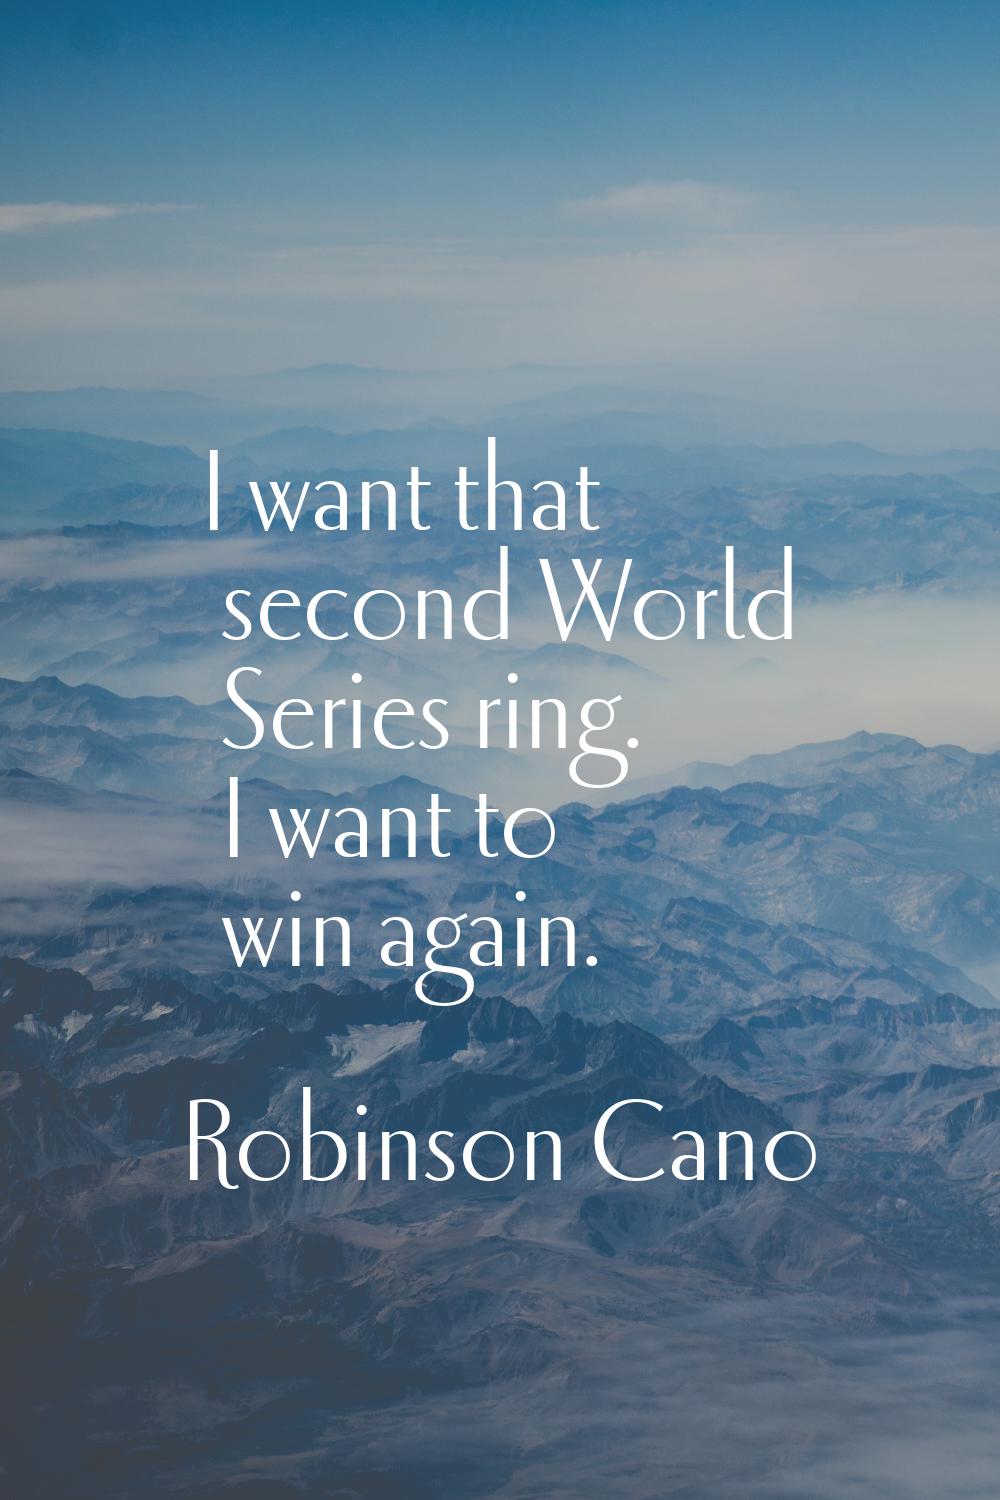 I want that second World Series ring. I want to win again.